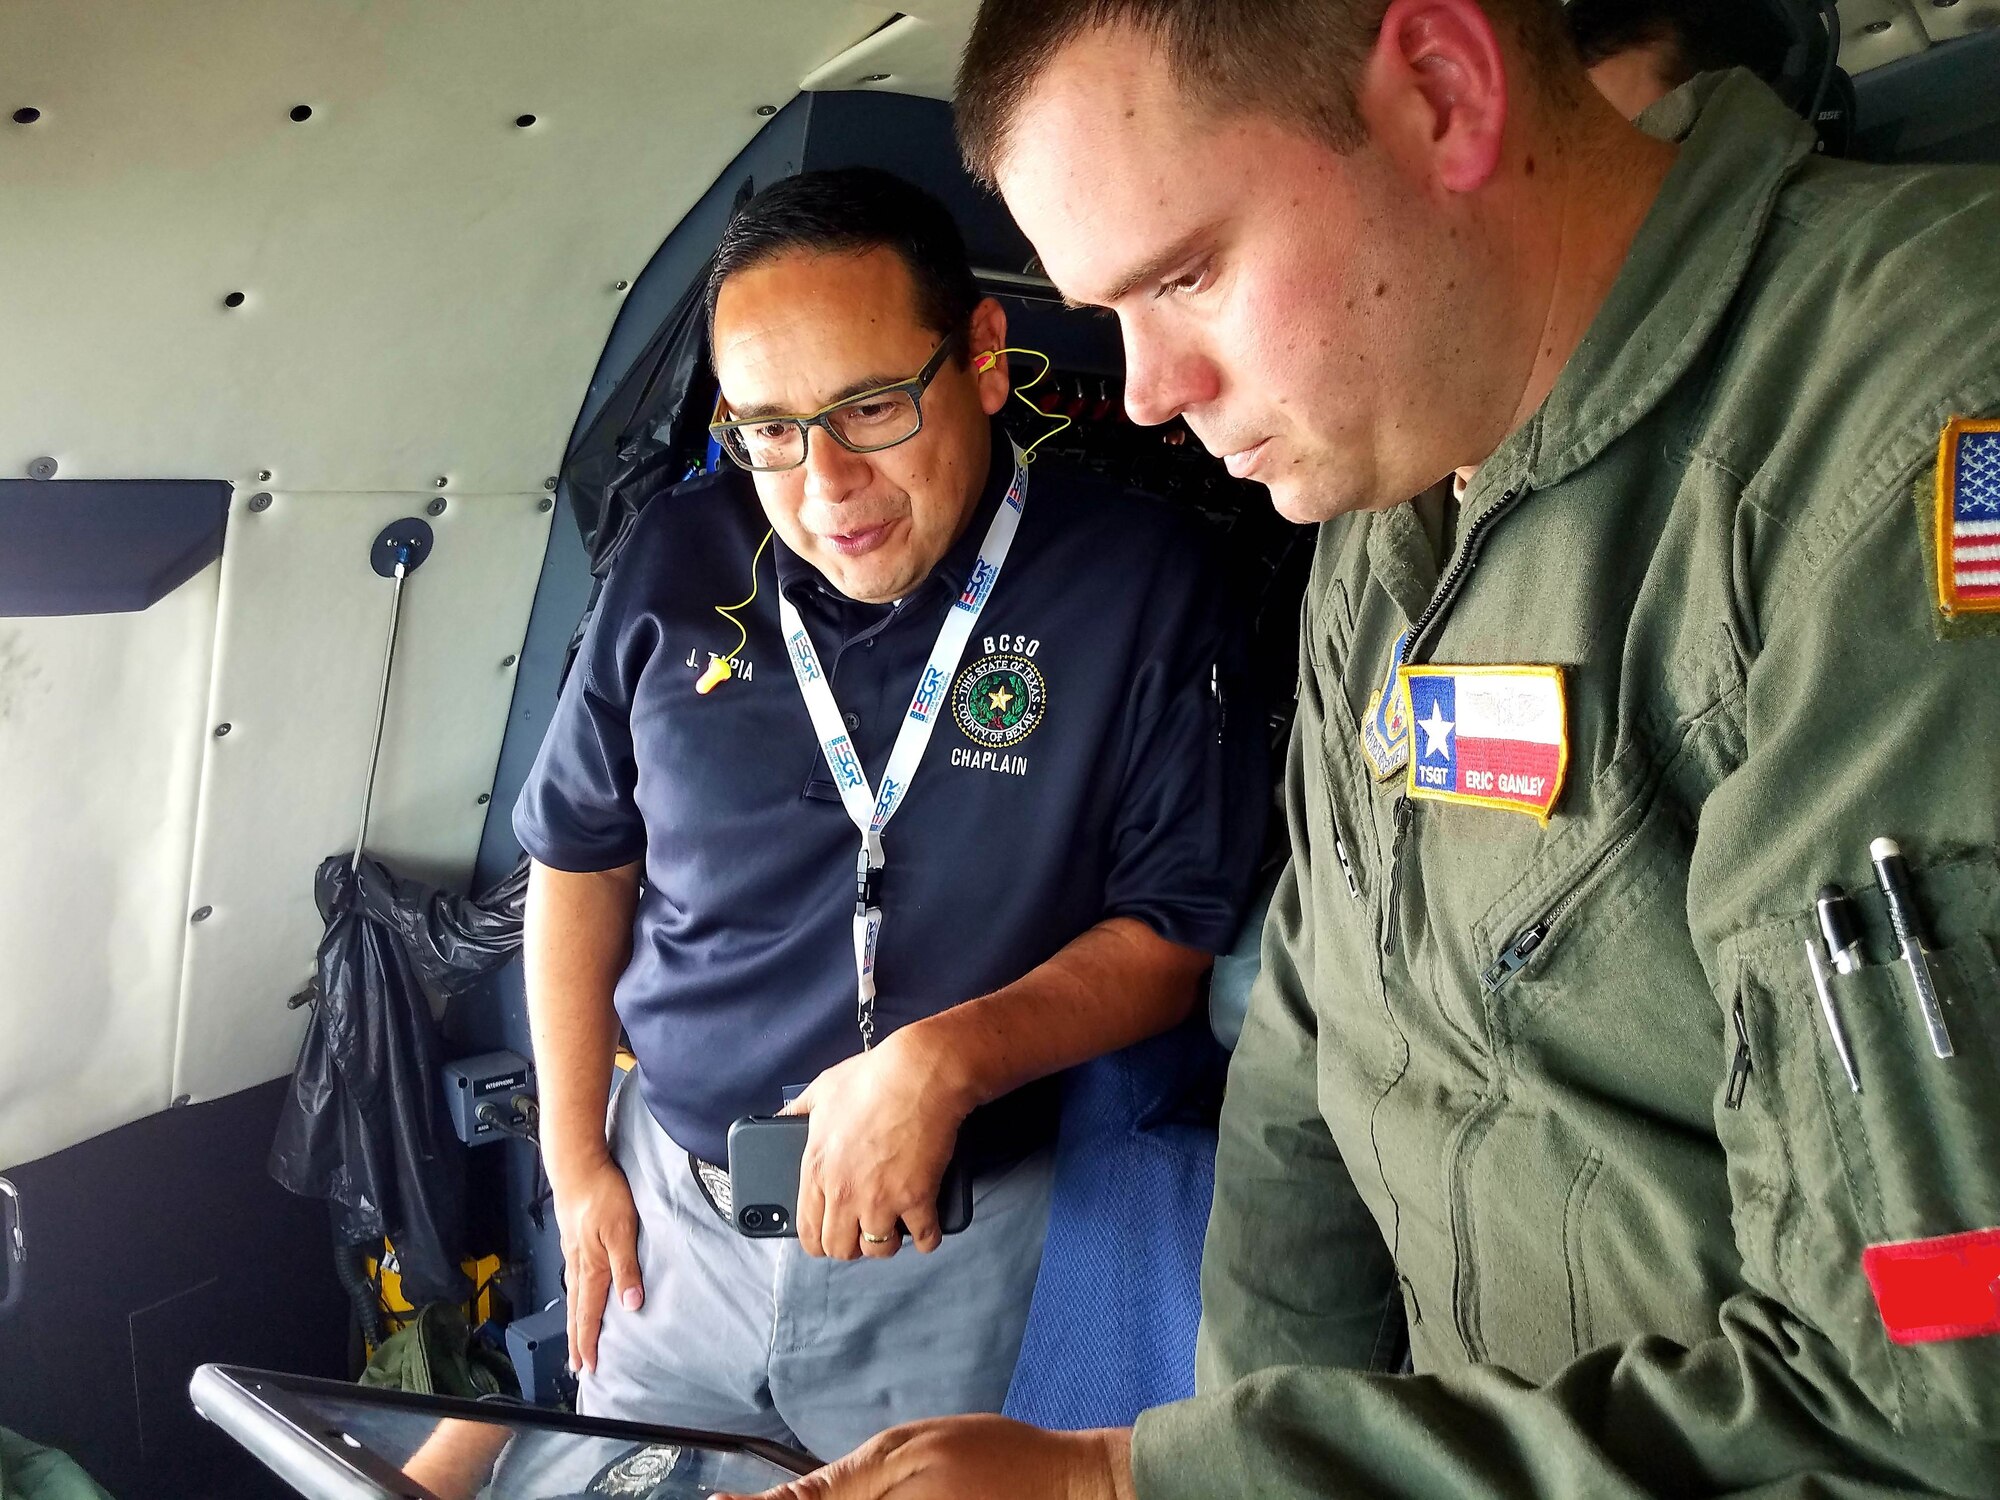 Tech. Sgt. Eric Ganley (right), 68th Airlift Squadron flight engineer, uses an electronic tablet to show Josue Tapia, Bexar County Sheriff’s Office chaplain, their location in-flight on a C-5M Super Galaxy during the 433rd Airlift Wing’s annual Clergy Day flight June 1, 2019 at Joint Base San Antonio-Lackland, Texas.